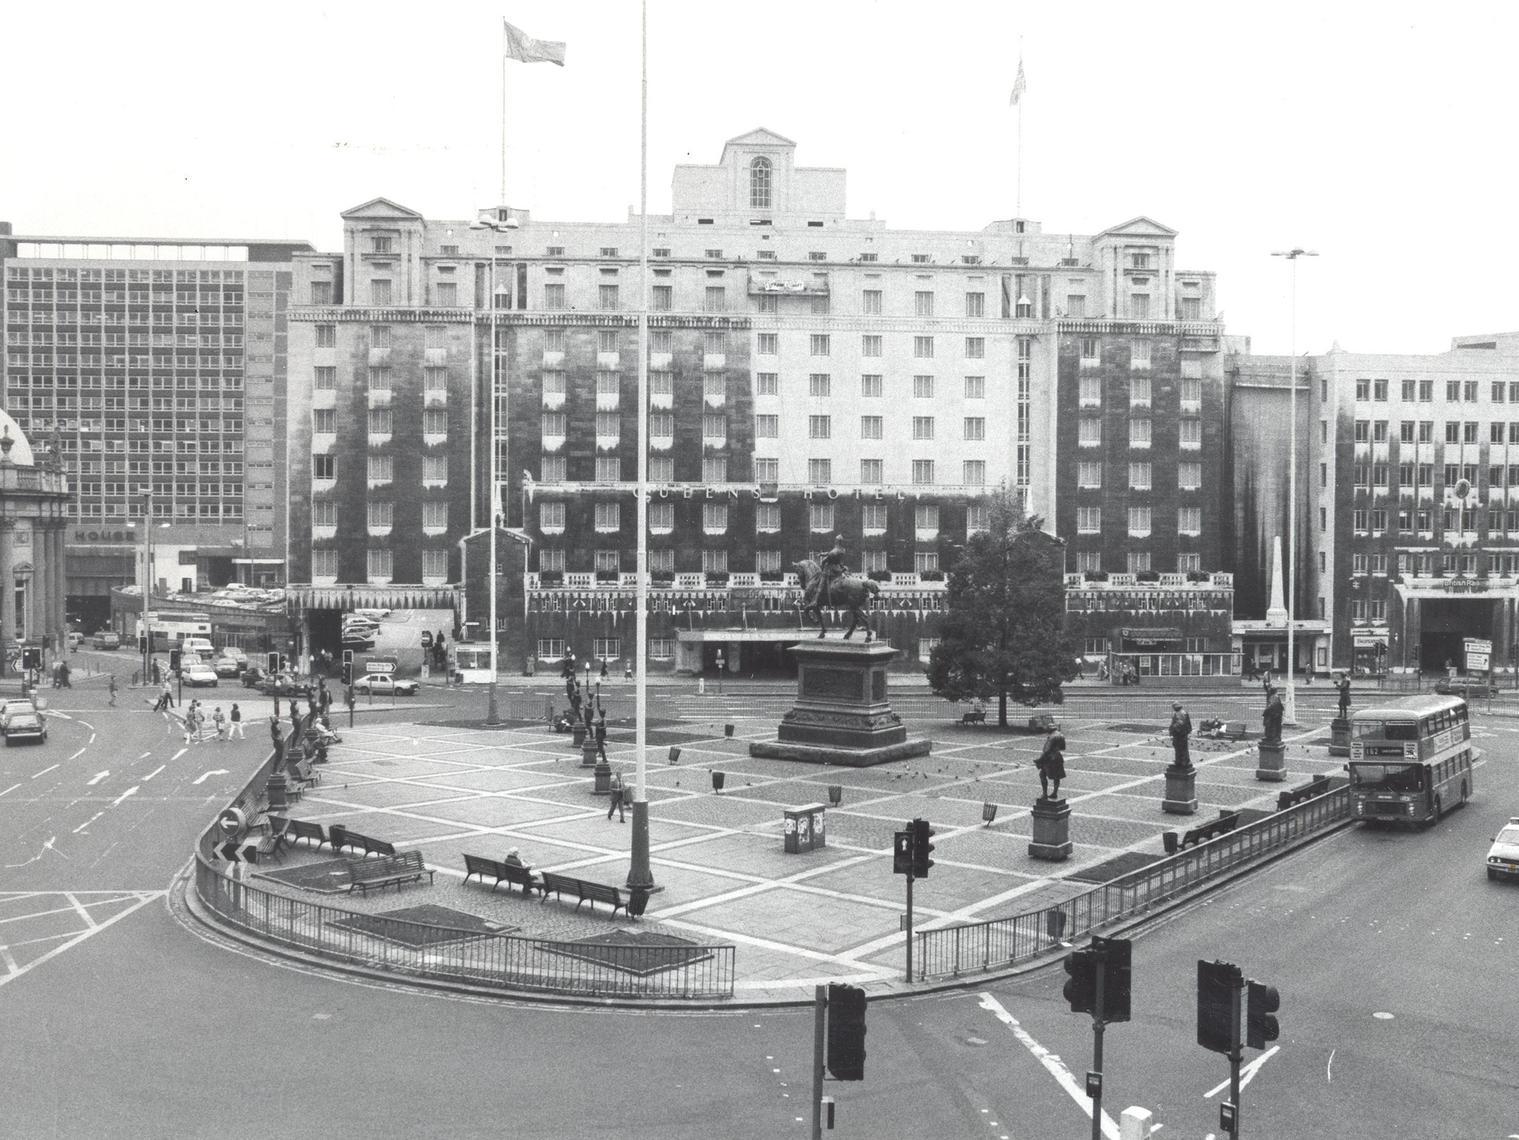 City Square in the mid-1980s. The Christmas tree was already in place.